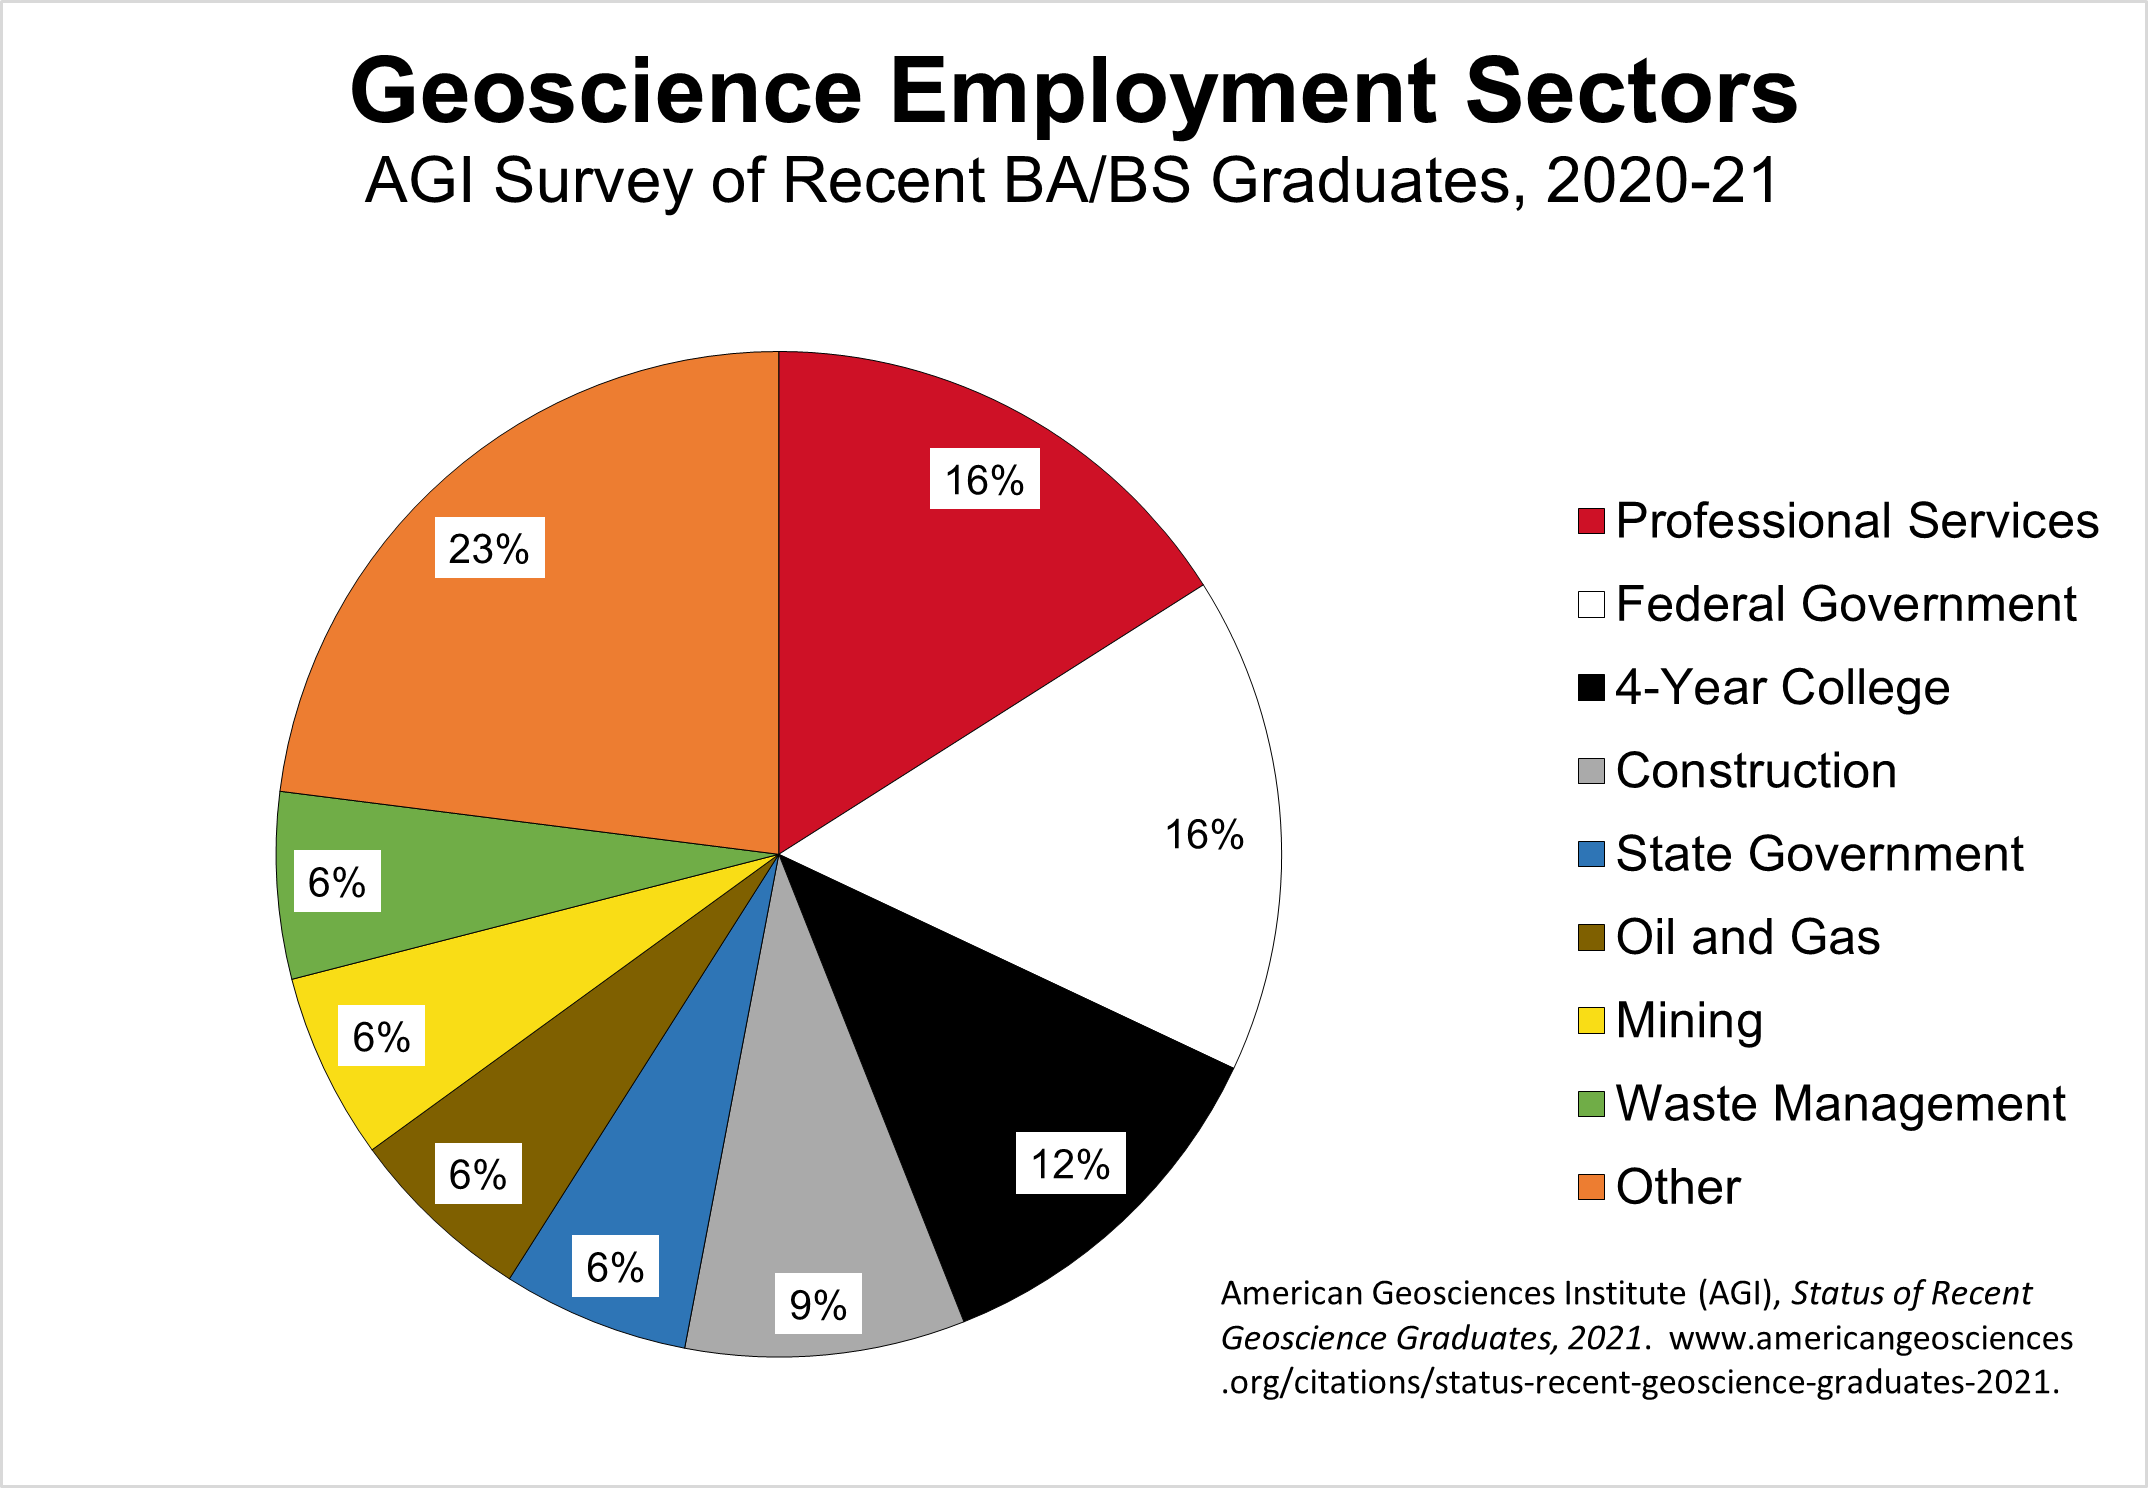 According to a 2021 survey by the American Geosciences Institute (AGI), recent Geoscience BA/BS graduates accepted jobs in the following sectors: Professional Services (16%), Federal Government (16%), 4-Year College (12%), Construction (9%), State Government (6%), Oil and Gas (6%), Mining (6%), Waste Management (6%), Other (23%).  Source: AGI, Status of Recent Geoscience Graduates, 2020-21.  www.americangeosciences.org/citations/status-recent-geoscience-graduates-2021.